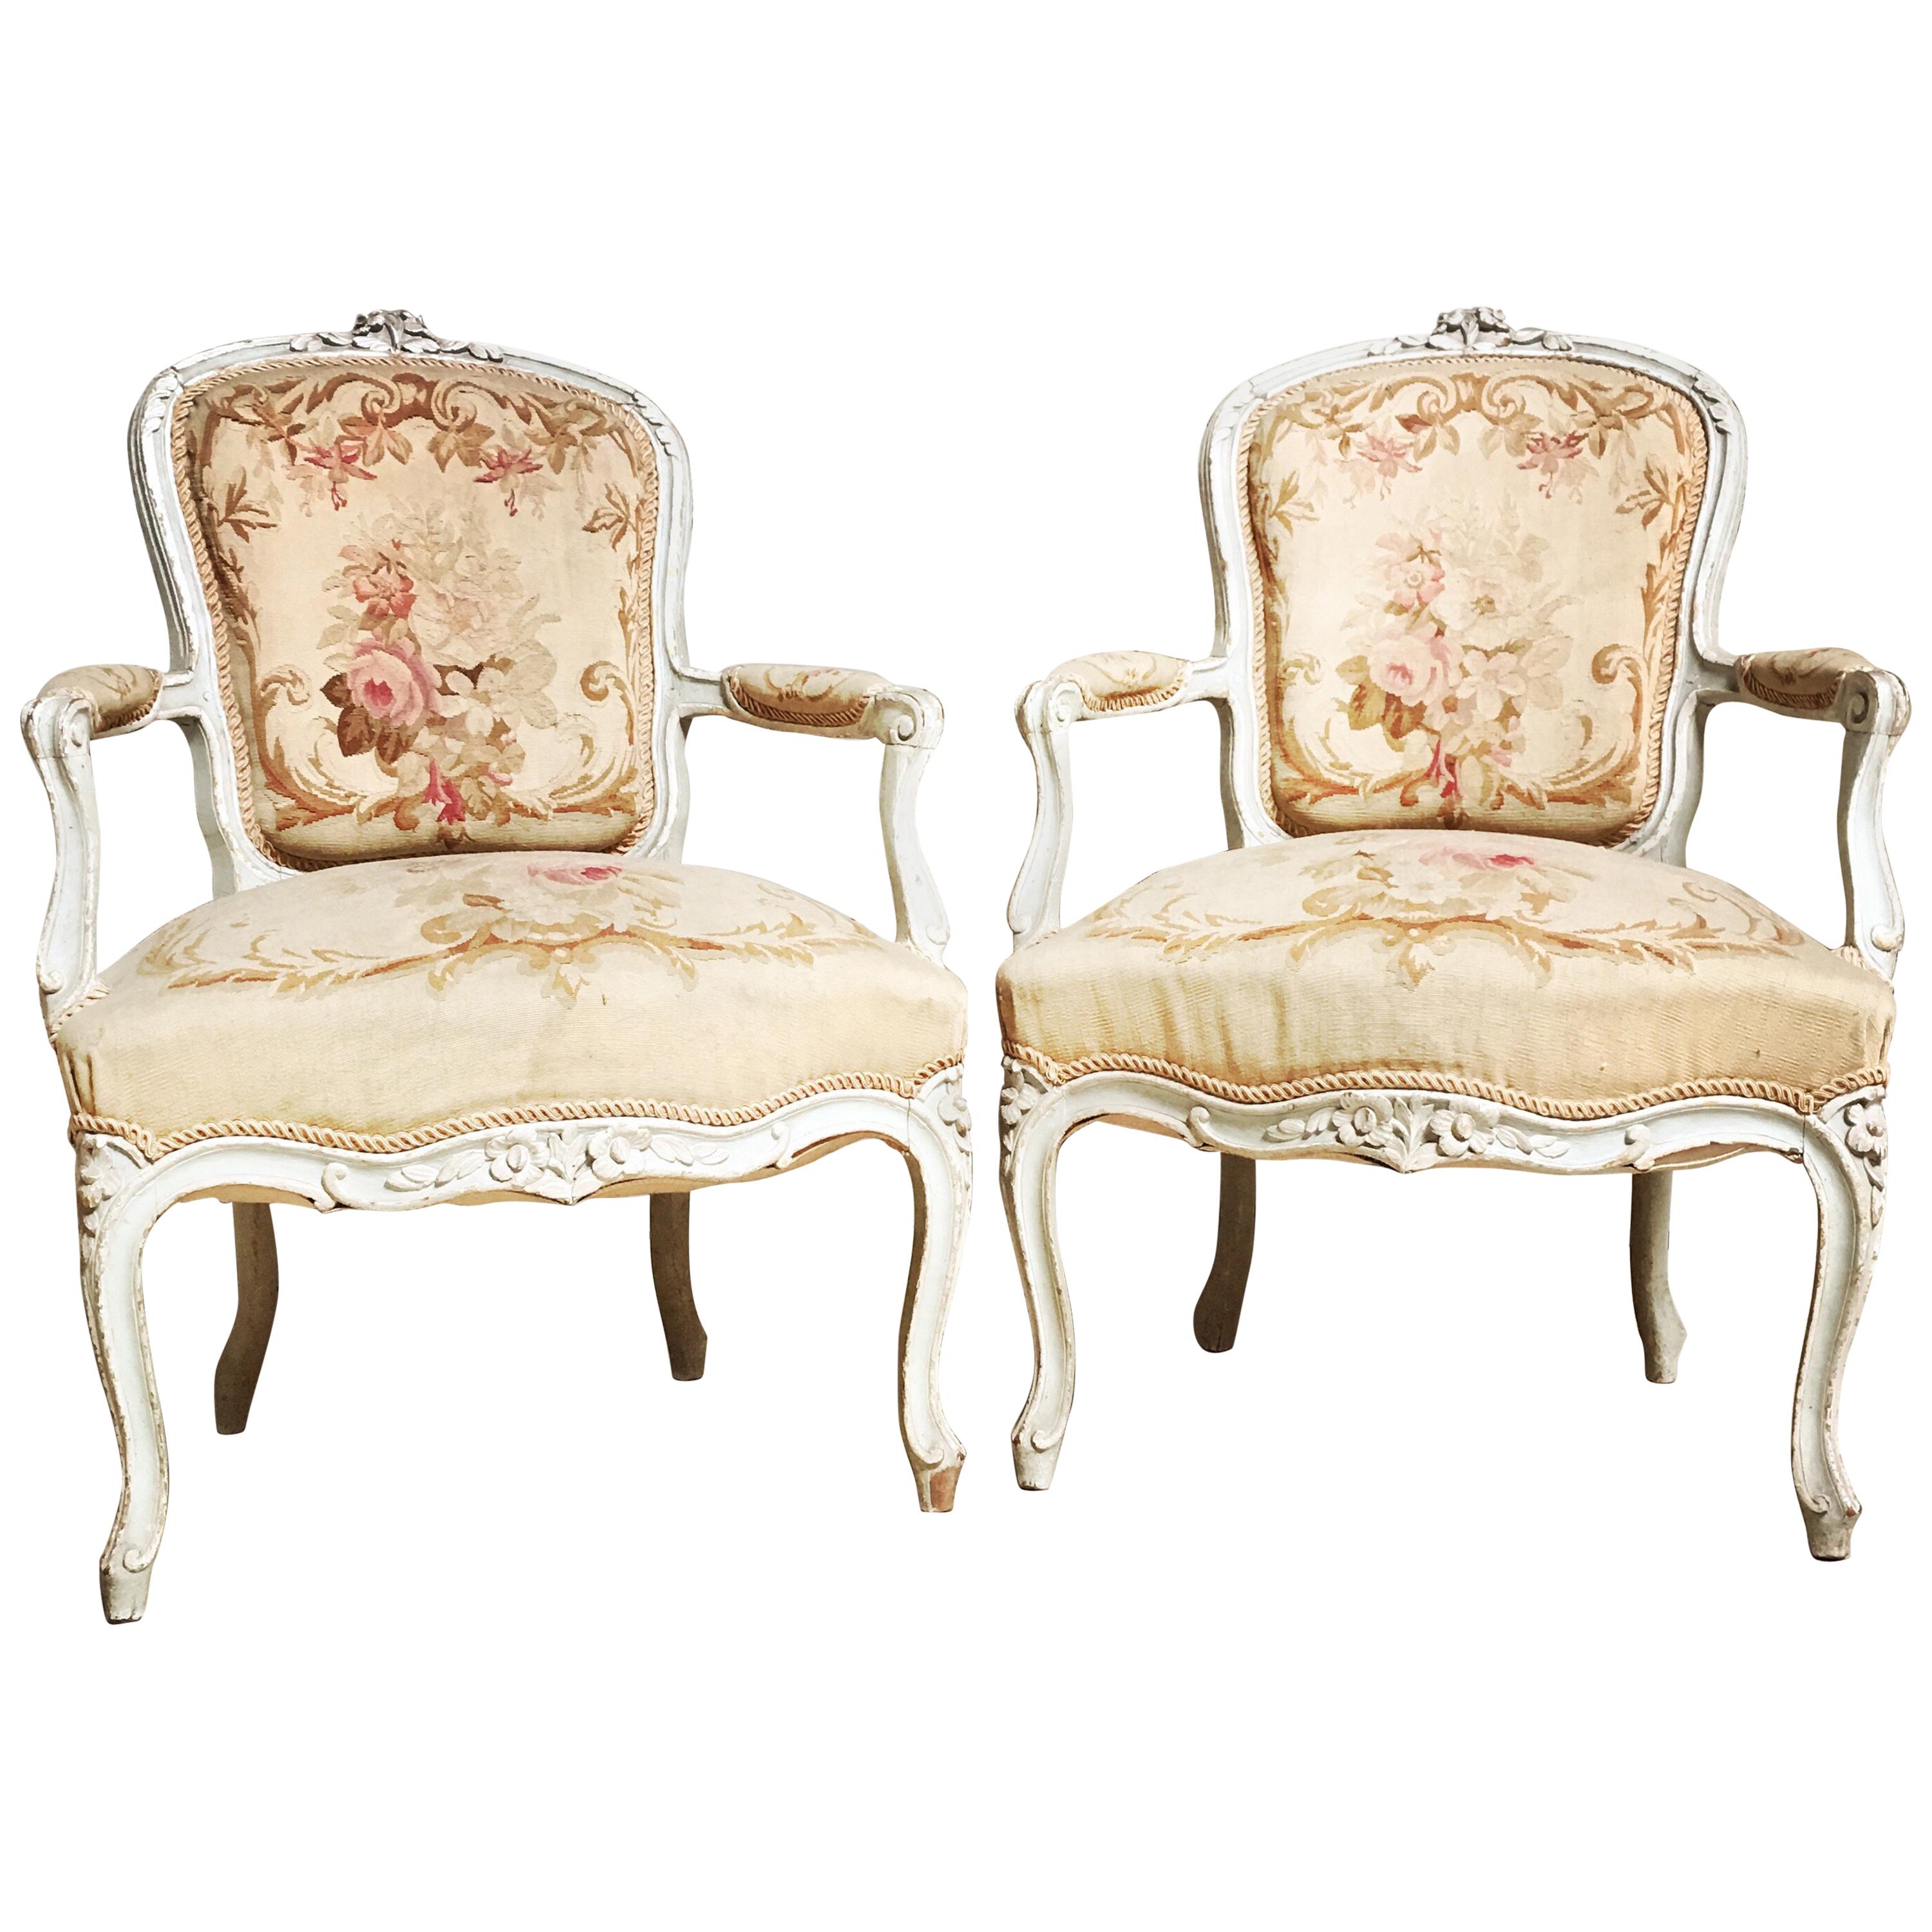 Pair of French Louis XV Style Fauteuils with Aubusson Tapestry